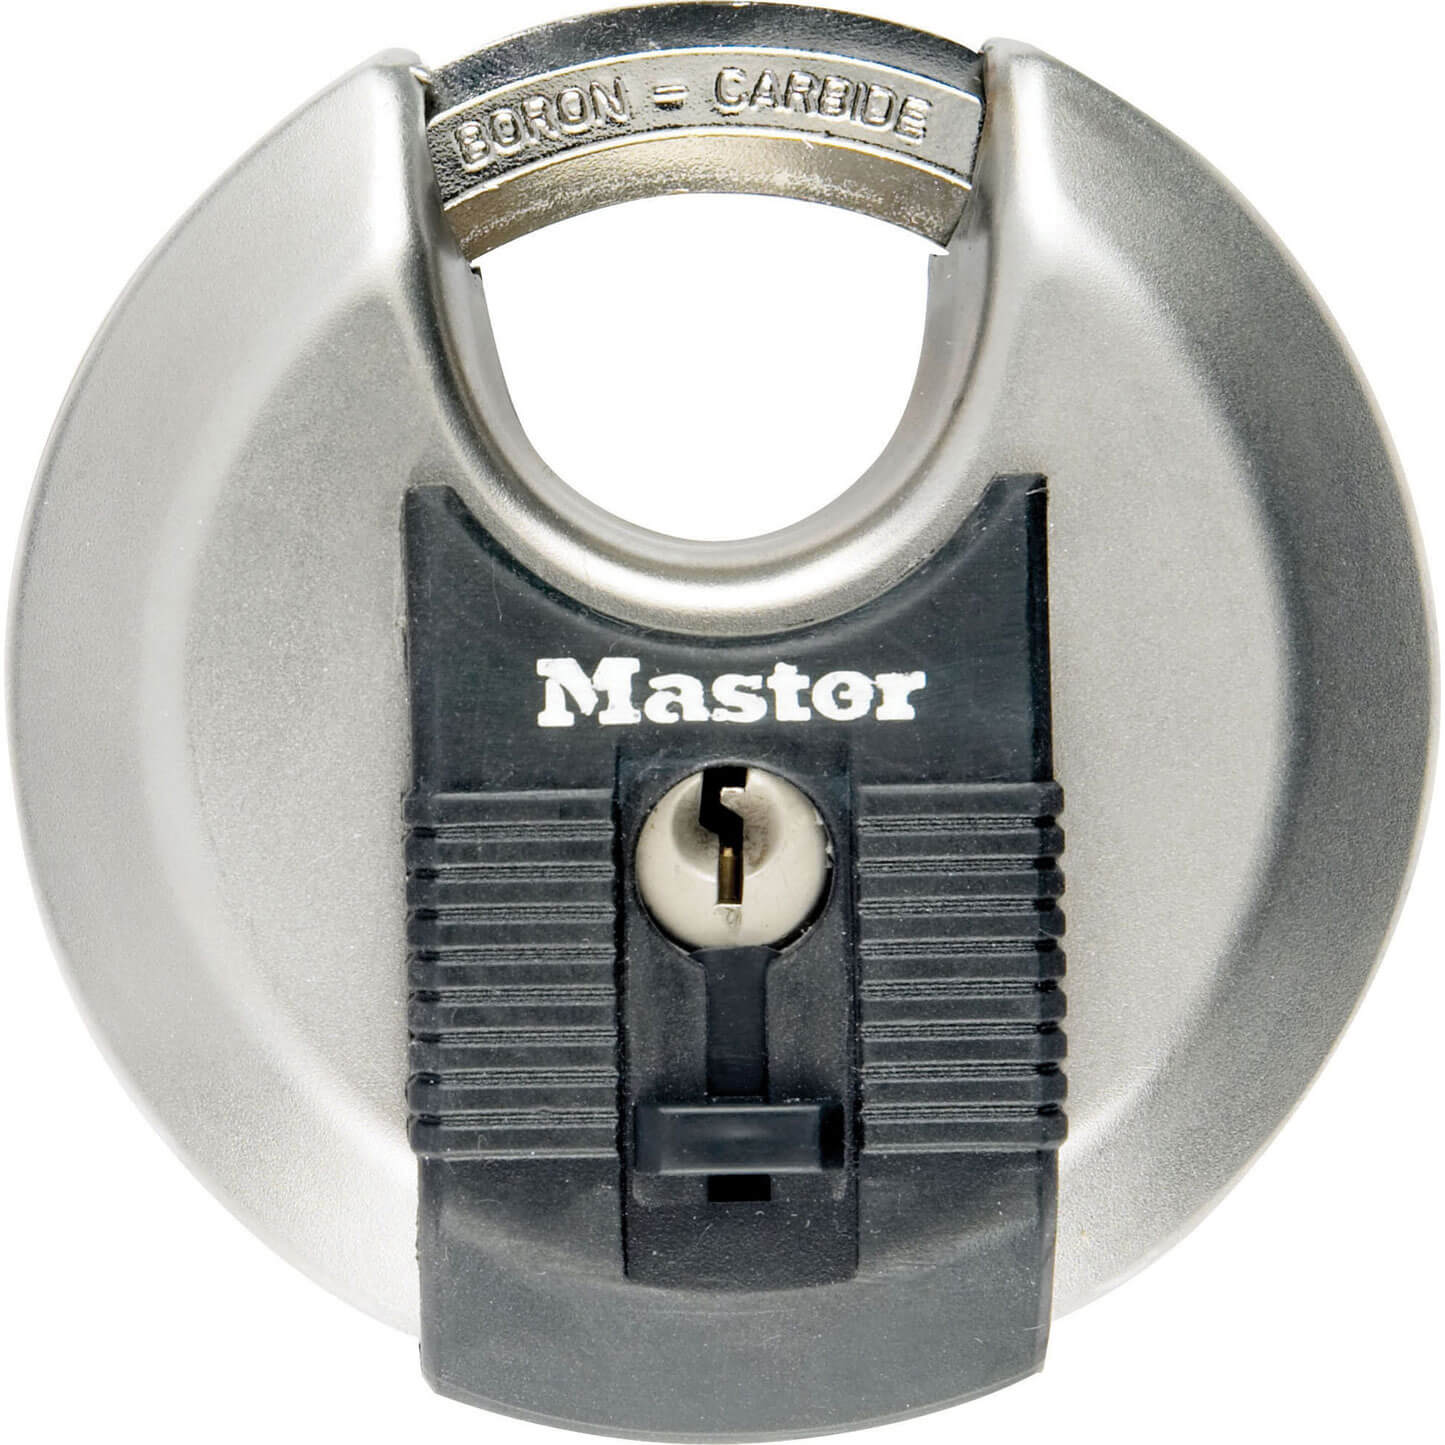 Image of Masterlock Excell Stainless Steel Discus Padlock 70mm Standard